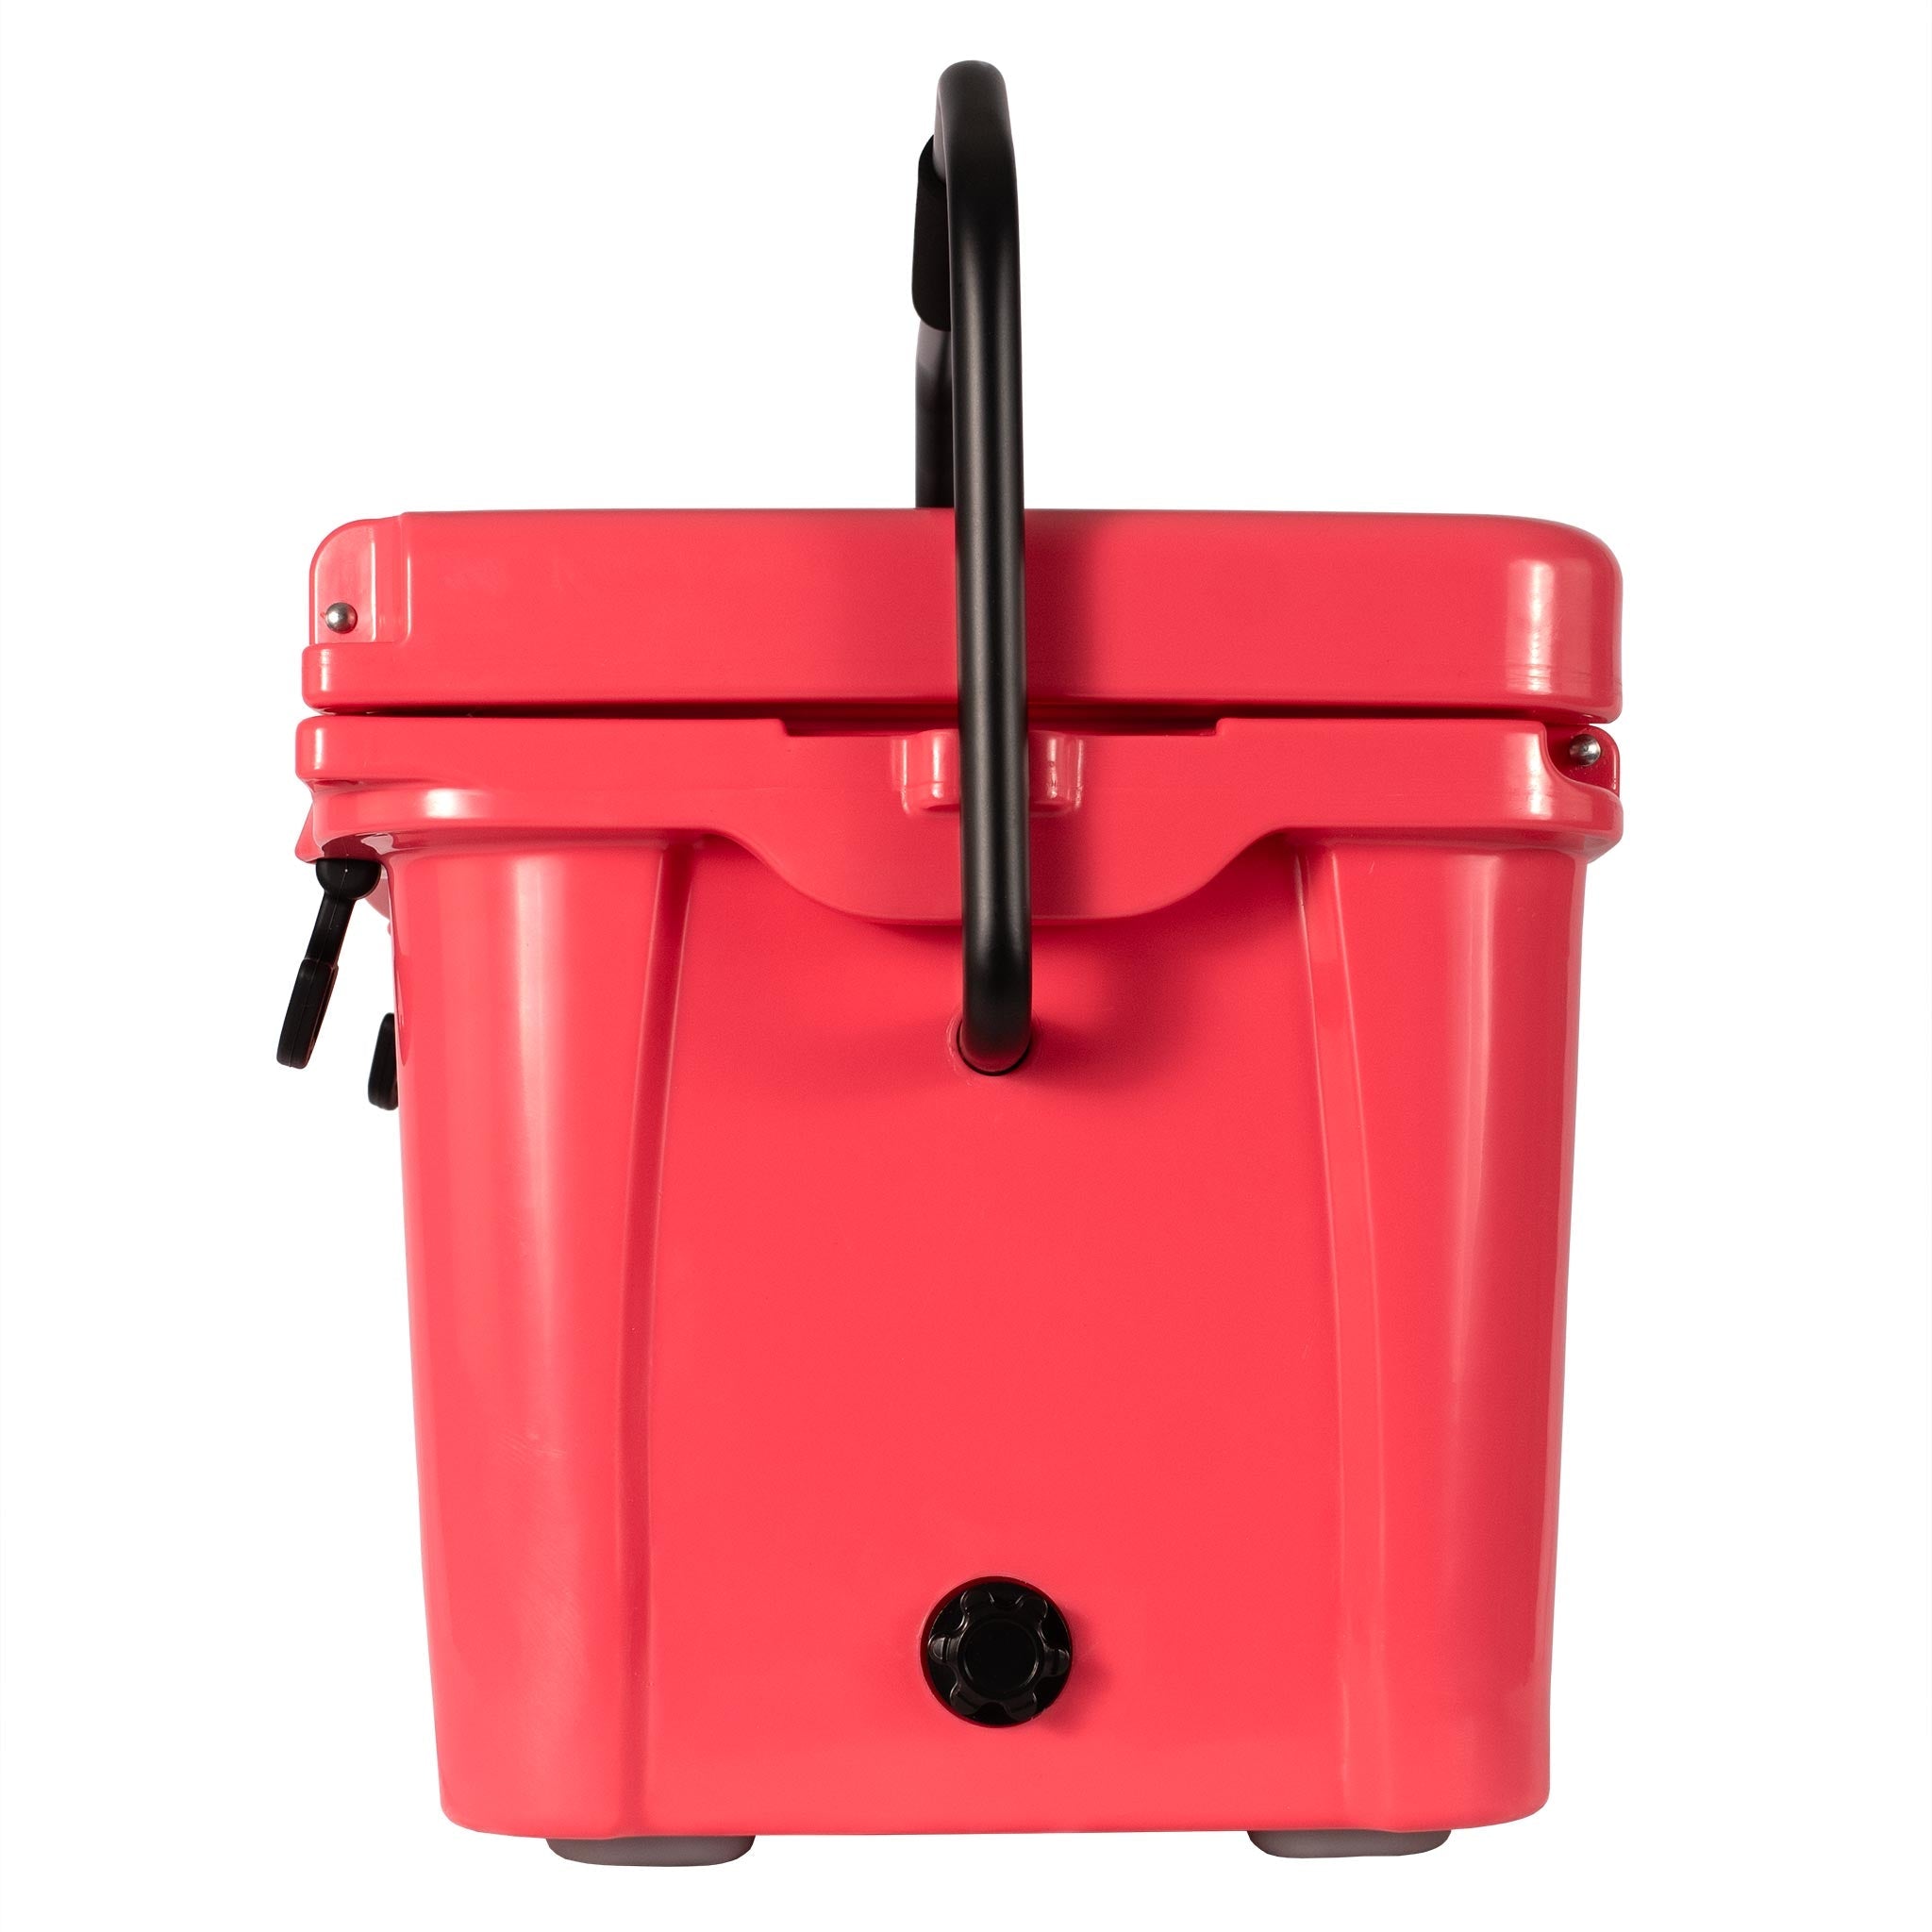 Bob The Cooler Co. Hard Cooler, The Wingman, 25qt holds up to 36 